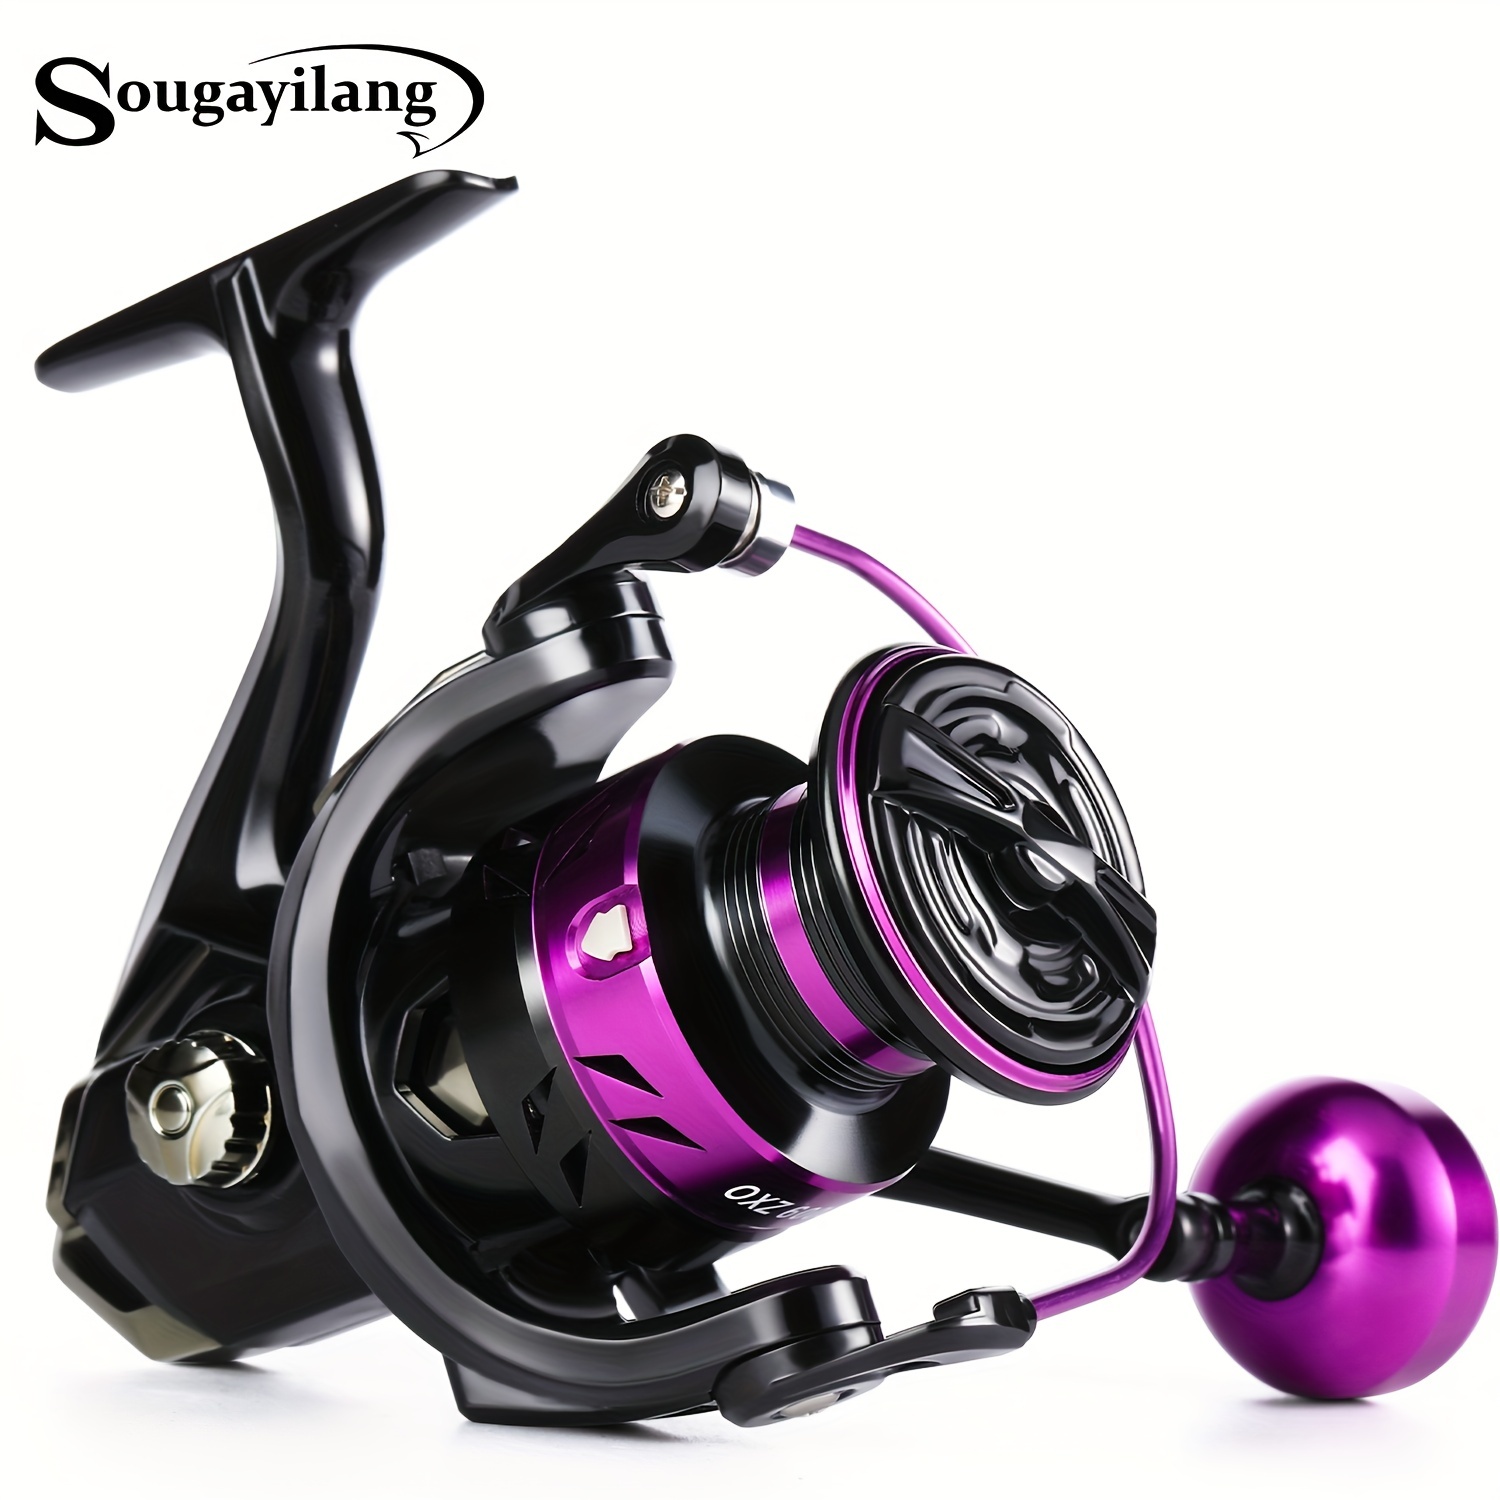 Sougayilang Spinning Fishing Reel 5.2:1 Gear Ratio Smooth Light Weight  1000-4000 Series For Bass Trout Freshwater Saltwater Fishing Reel